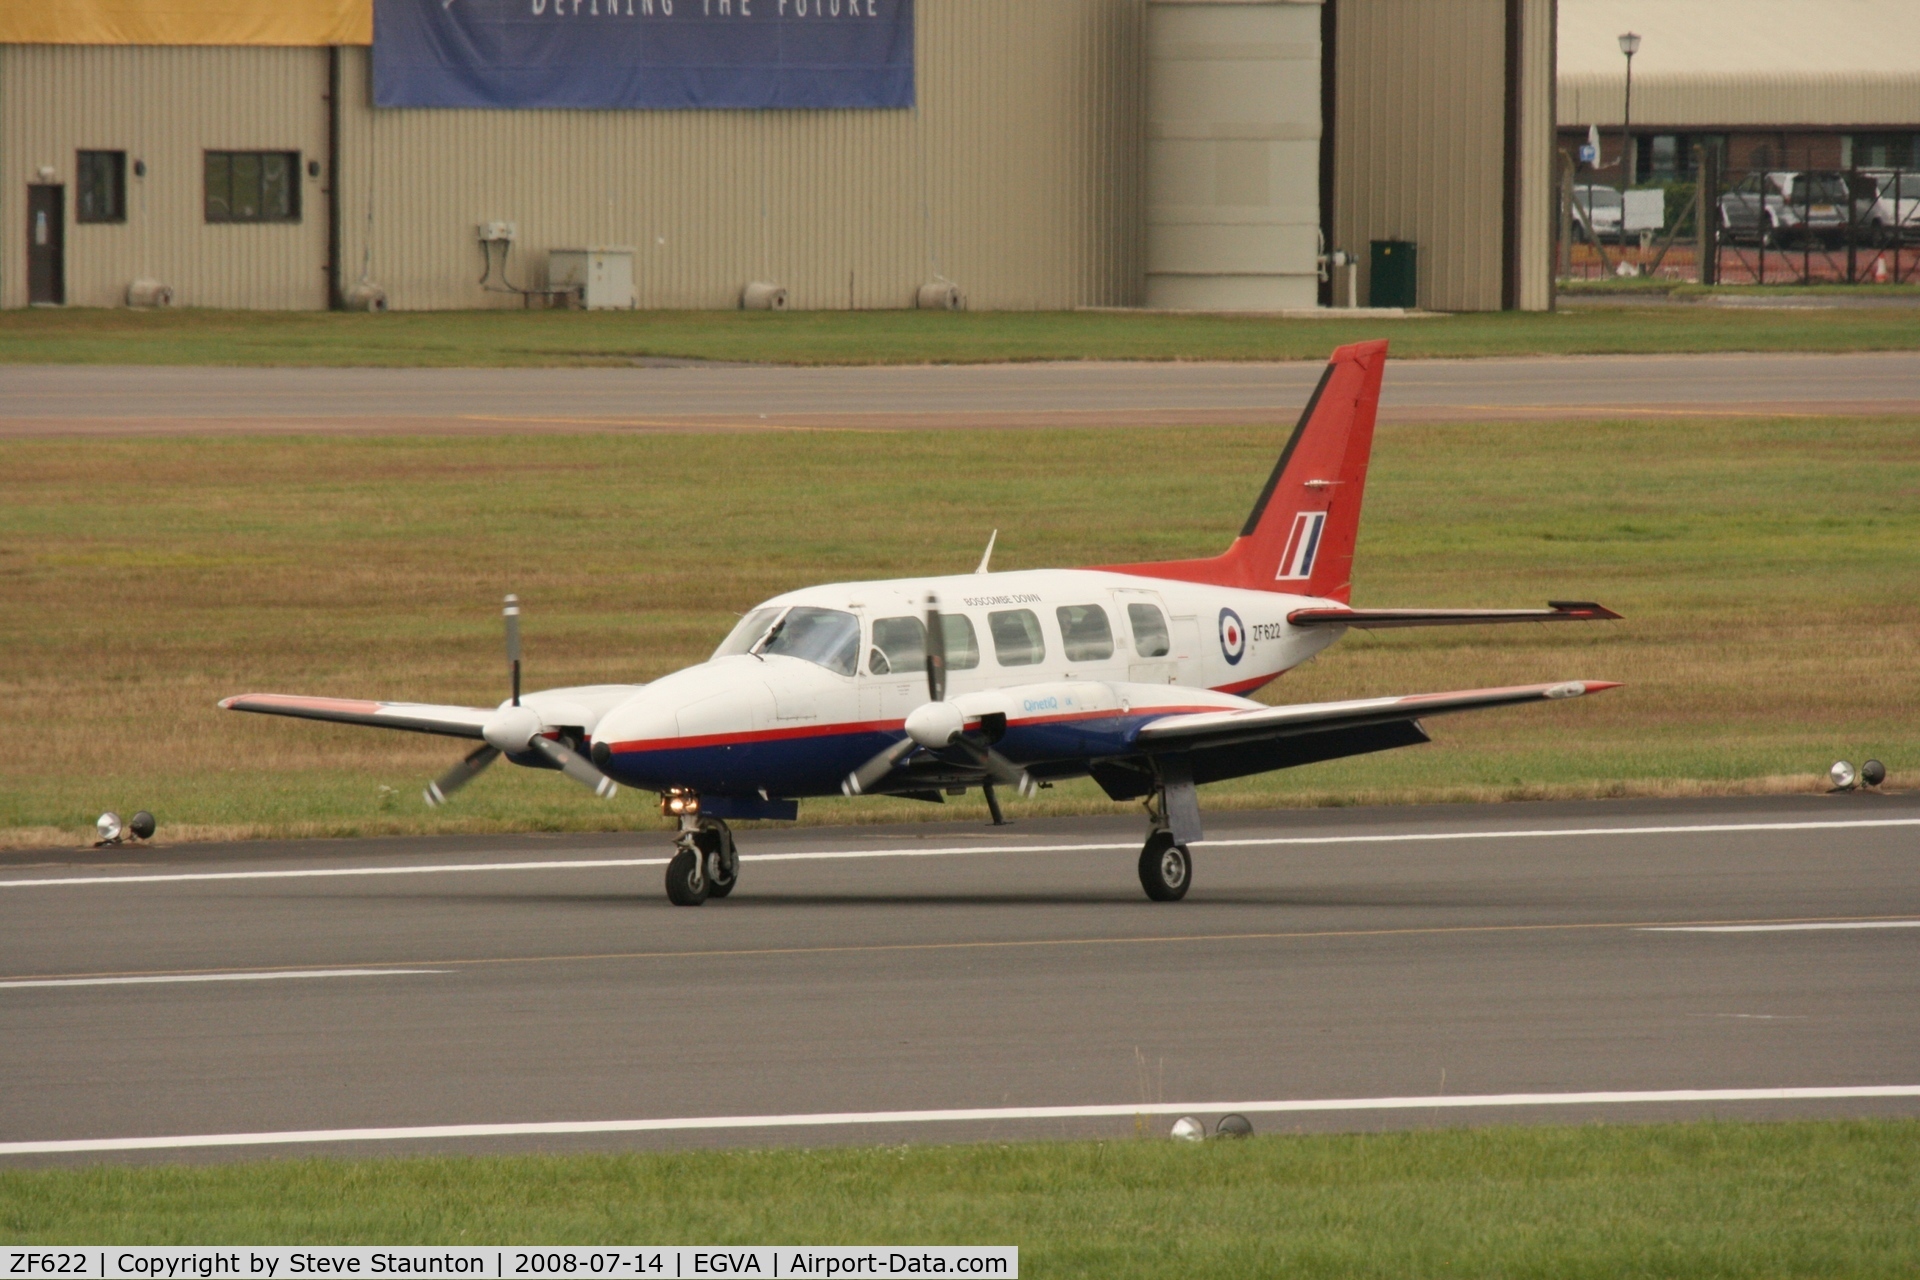 ZF622, 1980 Piper PA-31-350 Navajo Chieftain C/N 31-8052033, Taken at the Royal International Air Tattoo 2008 during arrivals and departures (show days cancelled due to bad weather)